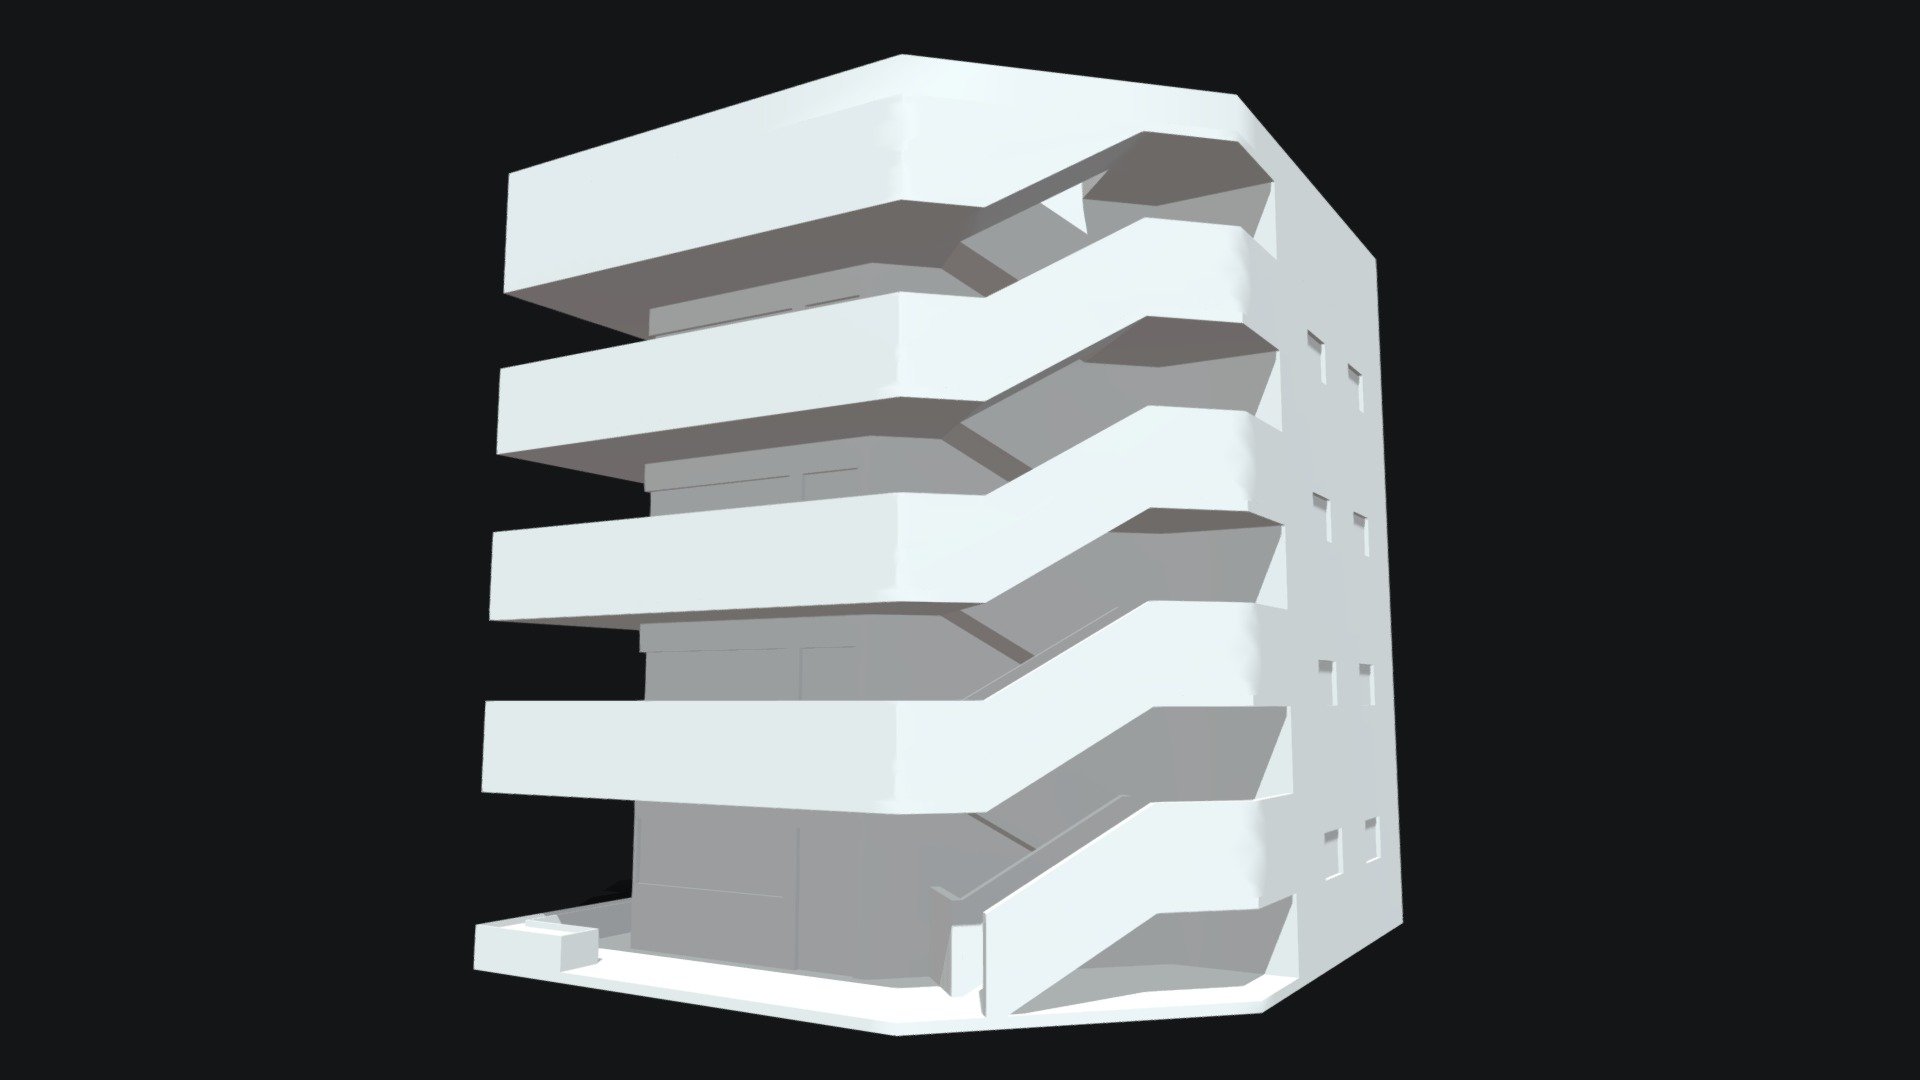 Printable 3D apartment building, following the form of mid-century urban developments.

Ribboning helps the street-viewer understand the building through human metrics. &ldquo;That balcony reaches my waist; I can know the number of floors by counting the clear number of balconies